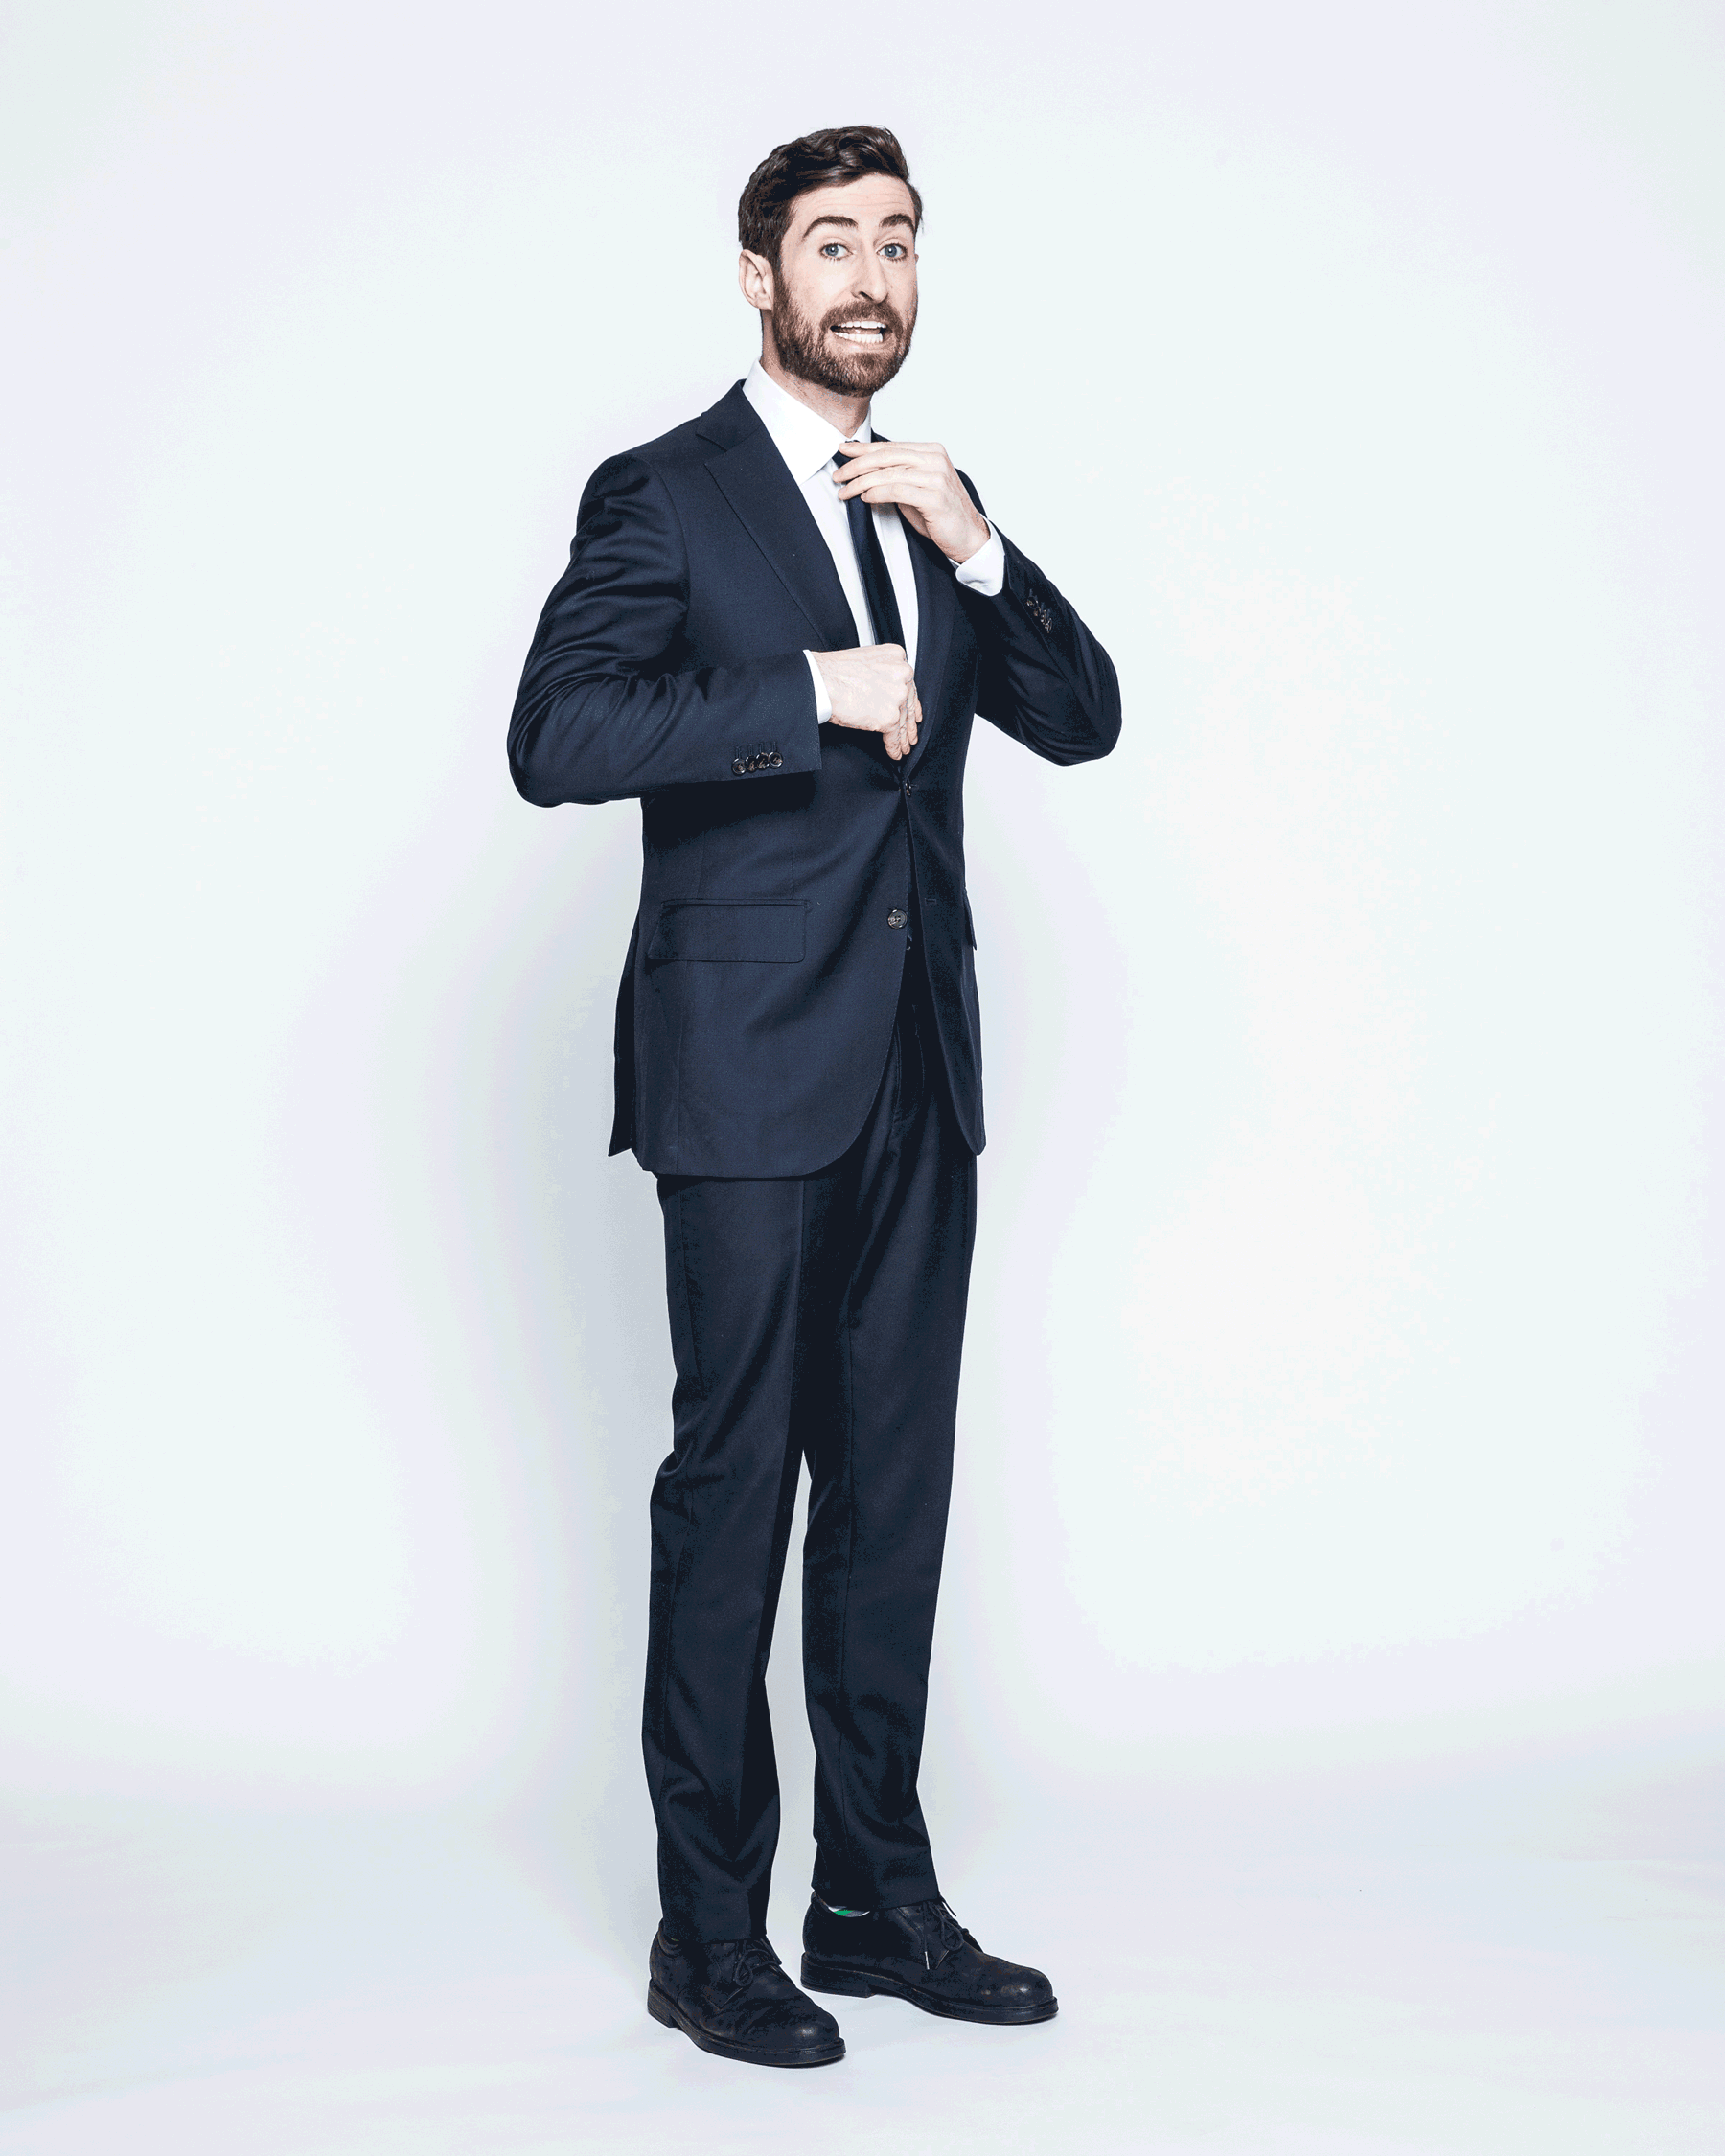 Scott Rogowsky, host of trivia app HQ. (Eric Ryan Anderson for TIME)